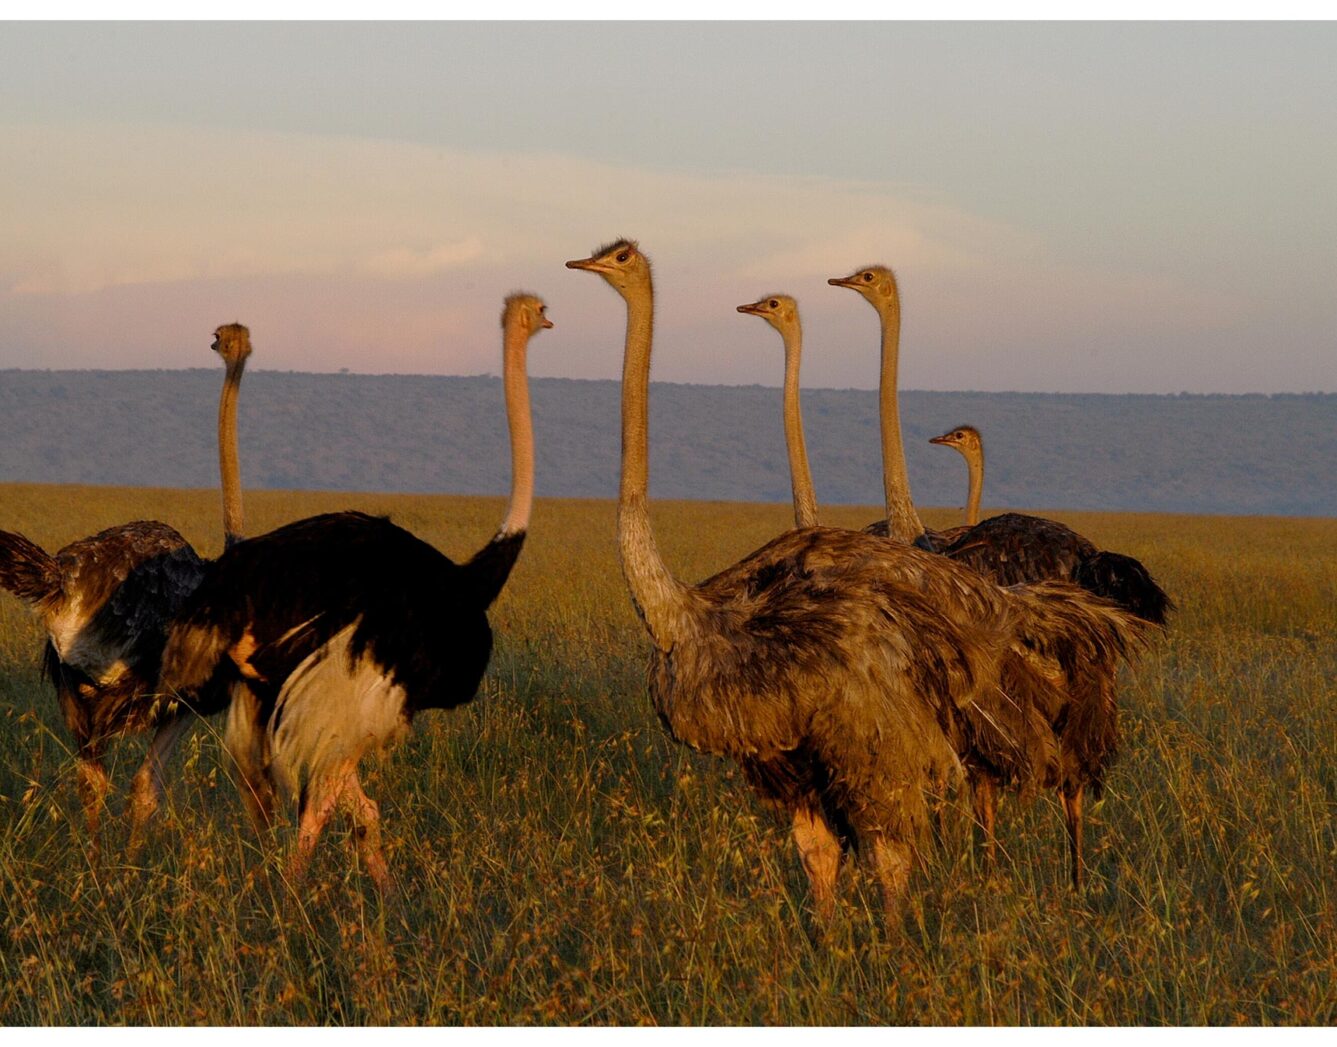 Ostriches standing in the grass